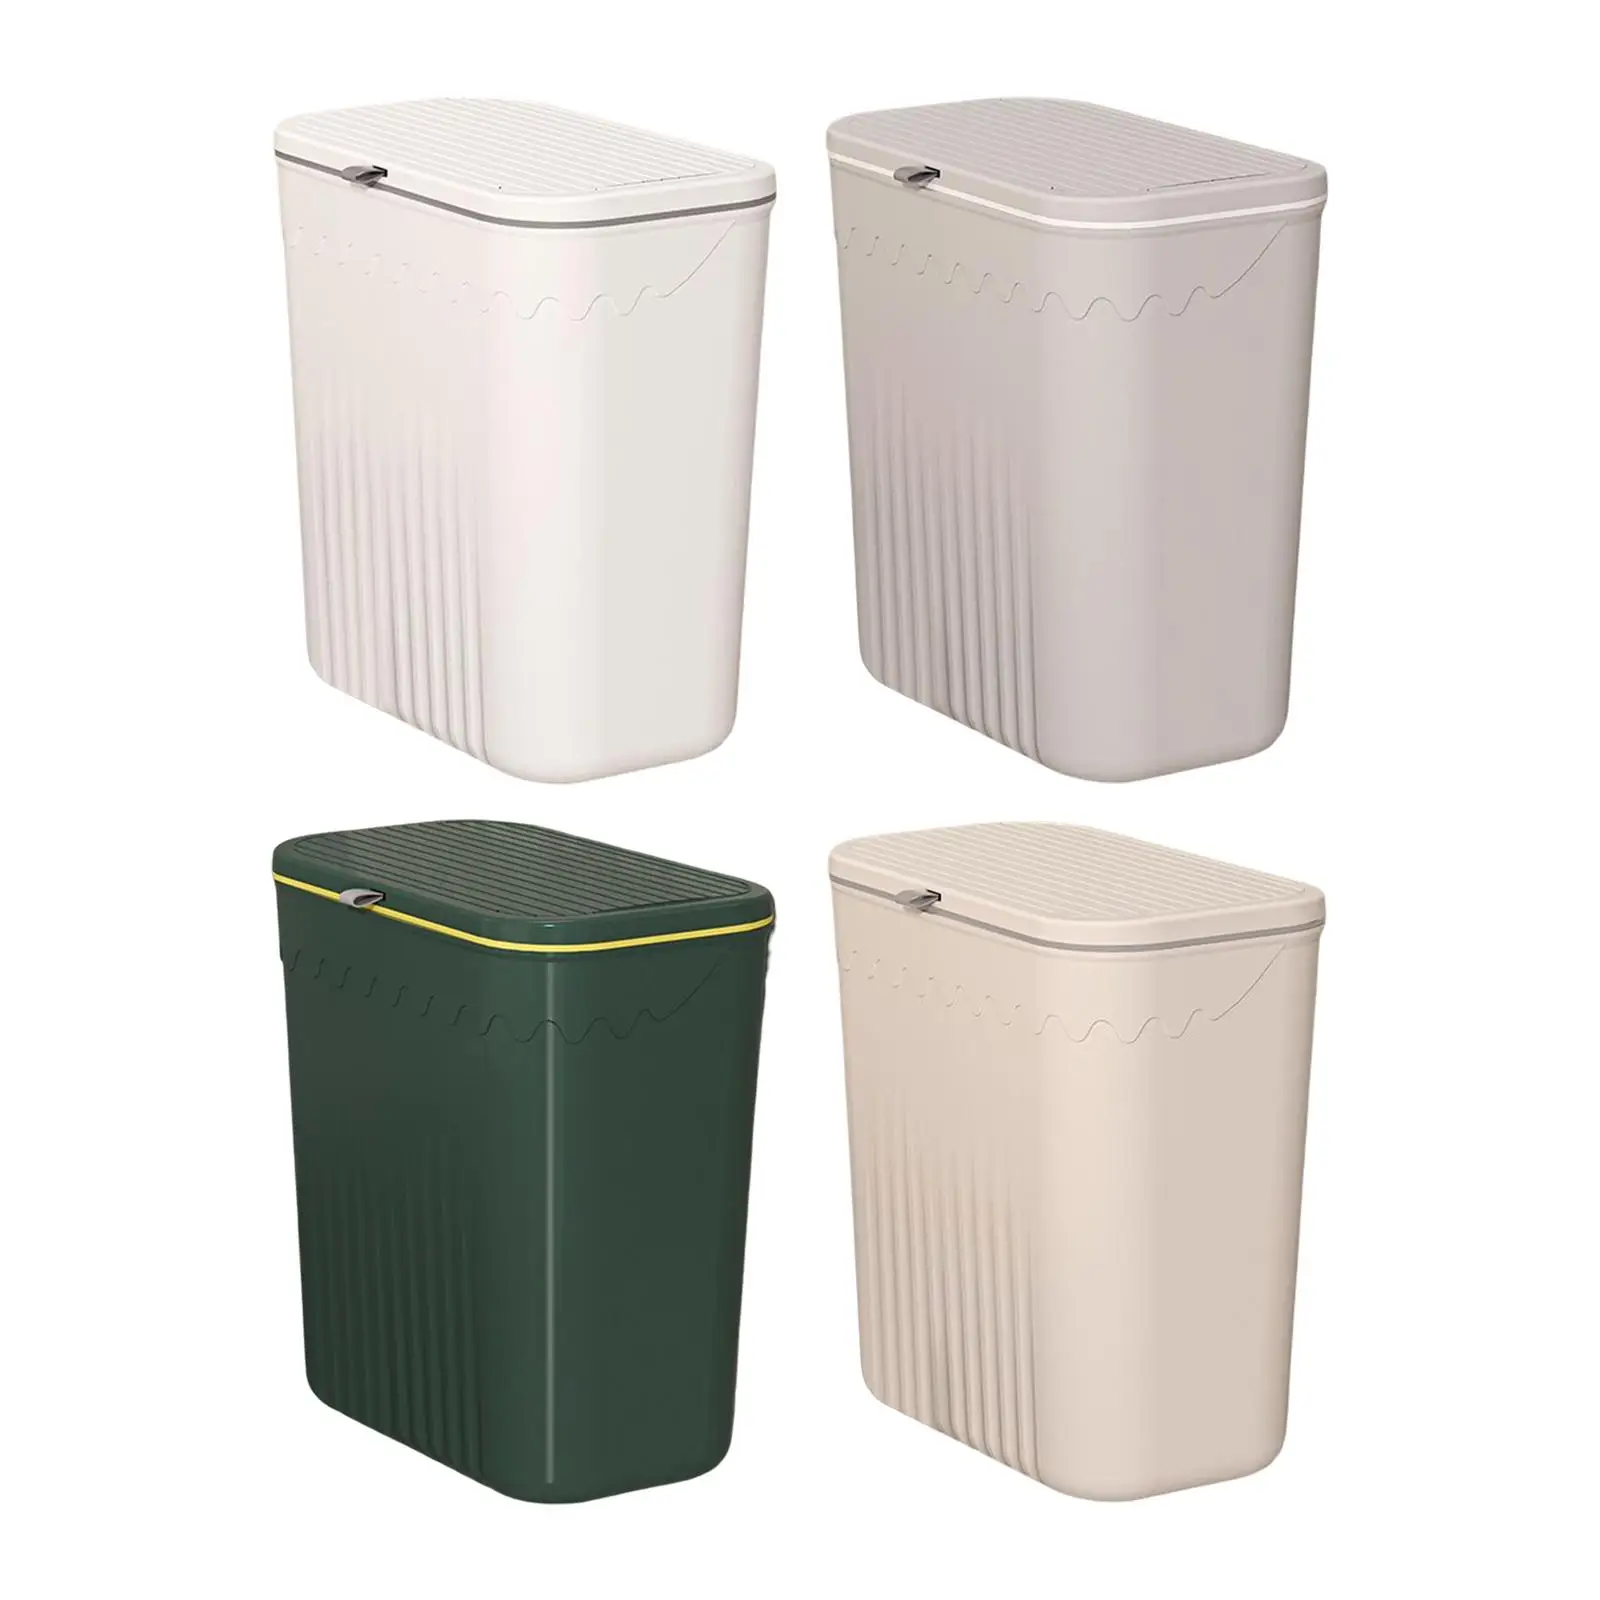 Wall Mounted Kitchen Trash Can Garbage Can Save Space Rubbish Bin Rubbish Basket Organizers for Bathroom Craft Room Toilet Door